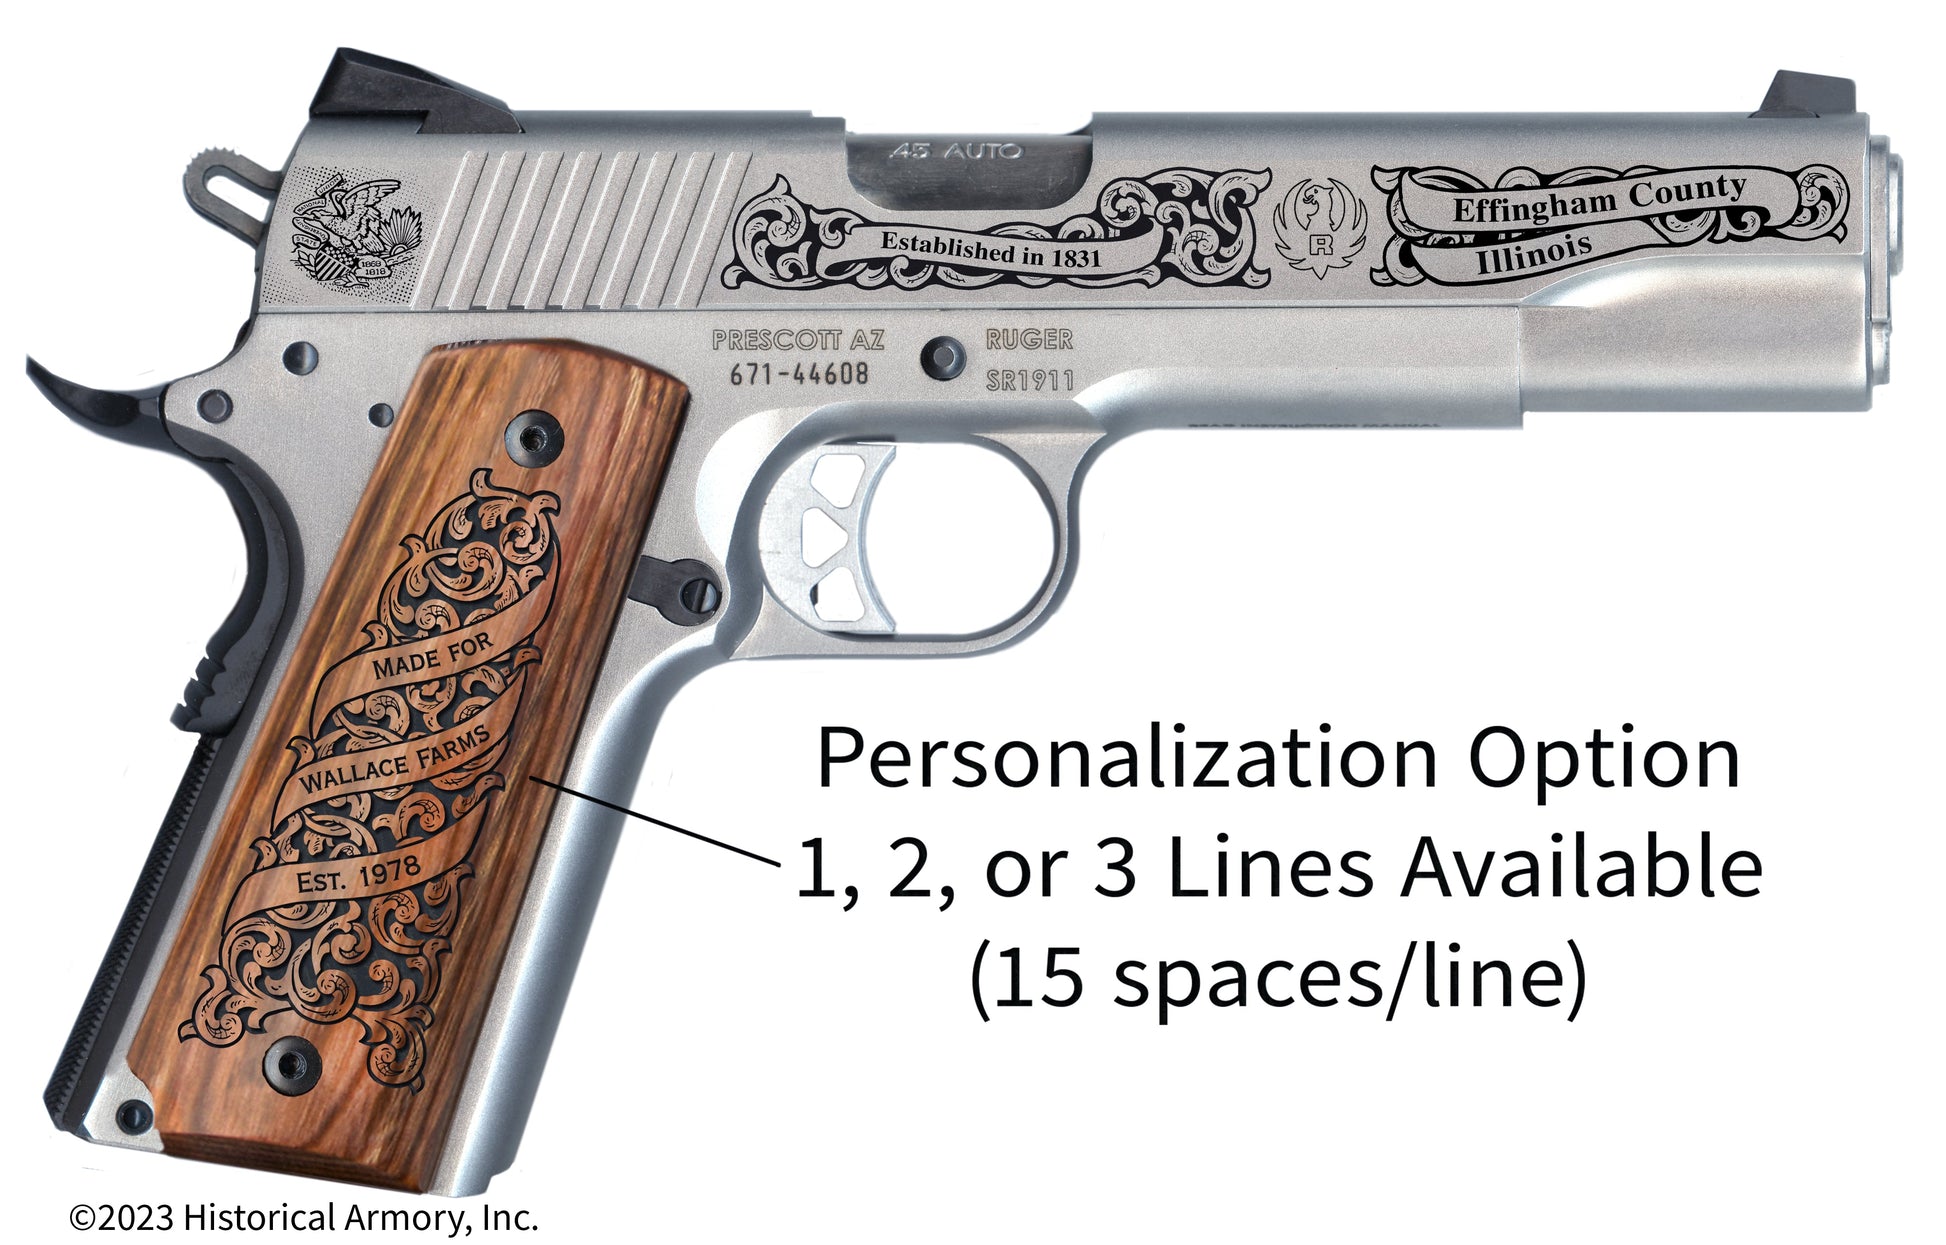 Effingham County Illinois Personalized Engraved .45 Auto Ruger 1911